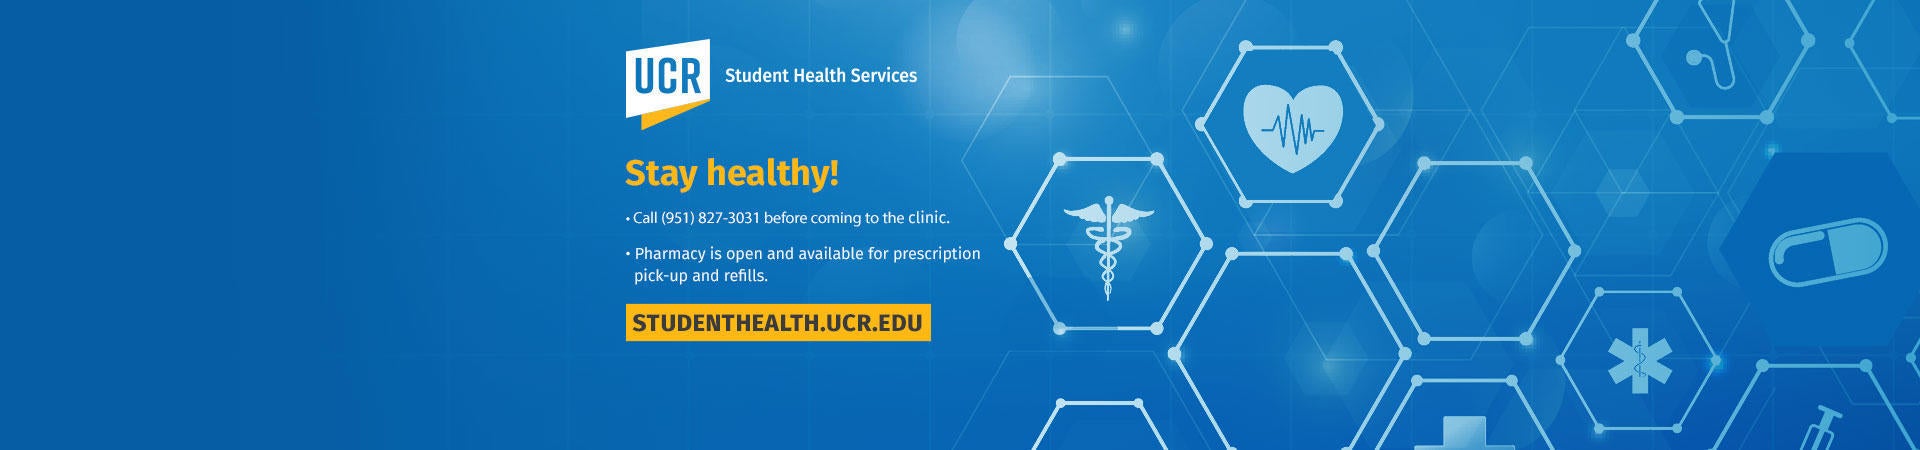 Hero - Student Health Services - Stay Healthy